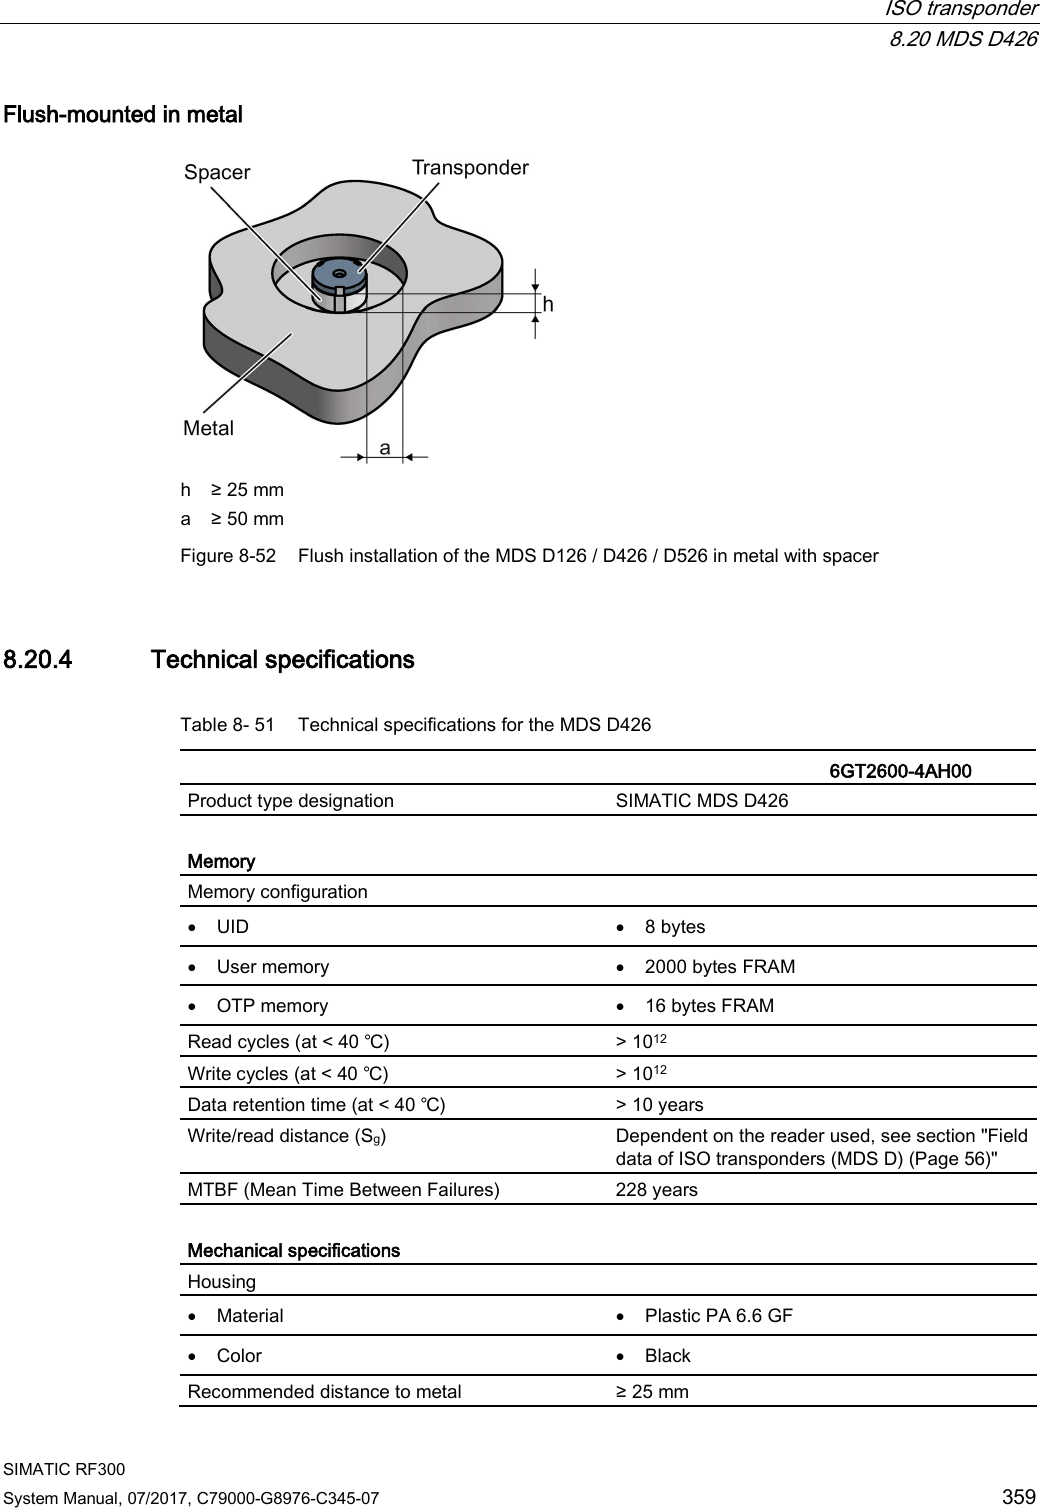  ISO transponder  8.20 MDS D426 SIMATIC RF300 System Manual, 07/2017, C79000-G8976-C345-07 359 Flush-mounted in metal  h ≥ 25 mm a ≥ 50 mm Figure 8-52 Flush installation of the MDS D126 / D426 / D526 in metal with spacer 8.20.4 Technical specifications Table 8- 51 Technical specifications for the MDS D426    6GT2600-4AH00 Product type designation SIMATIC MDS D426  Memory Memory configuration  • UID • 8 bytes • User memory • 2000 bytes FRAM • OTP memory • 16 bytes FRAM Read cycles (at &lt; 40 ℃) &gt; 1012 Write cycles (at &lt; 40 ℃) &gt; 1012 Data retention time (at &lt; 40 ℃) &gt; 10 years Write/read distance (Sg)  Dependent on the reader used, see section &quot;Field data of ISO transponders (MDS D) (Page 56)&quot; MTBF (Mean Time Between Failures) 228 years  Mechanical specifications Housing  • Material • Plastic PA 6.6 GF • Color • Black Recommended distance to metal ≥ 25 mm 